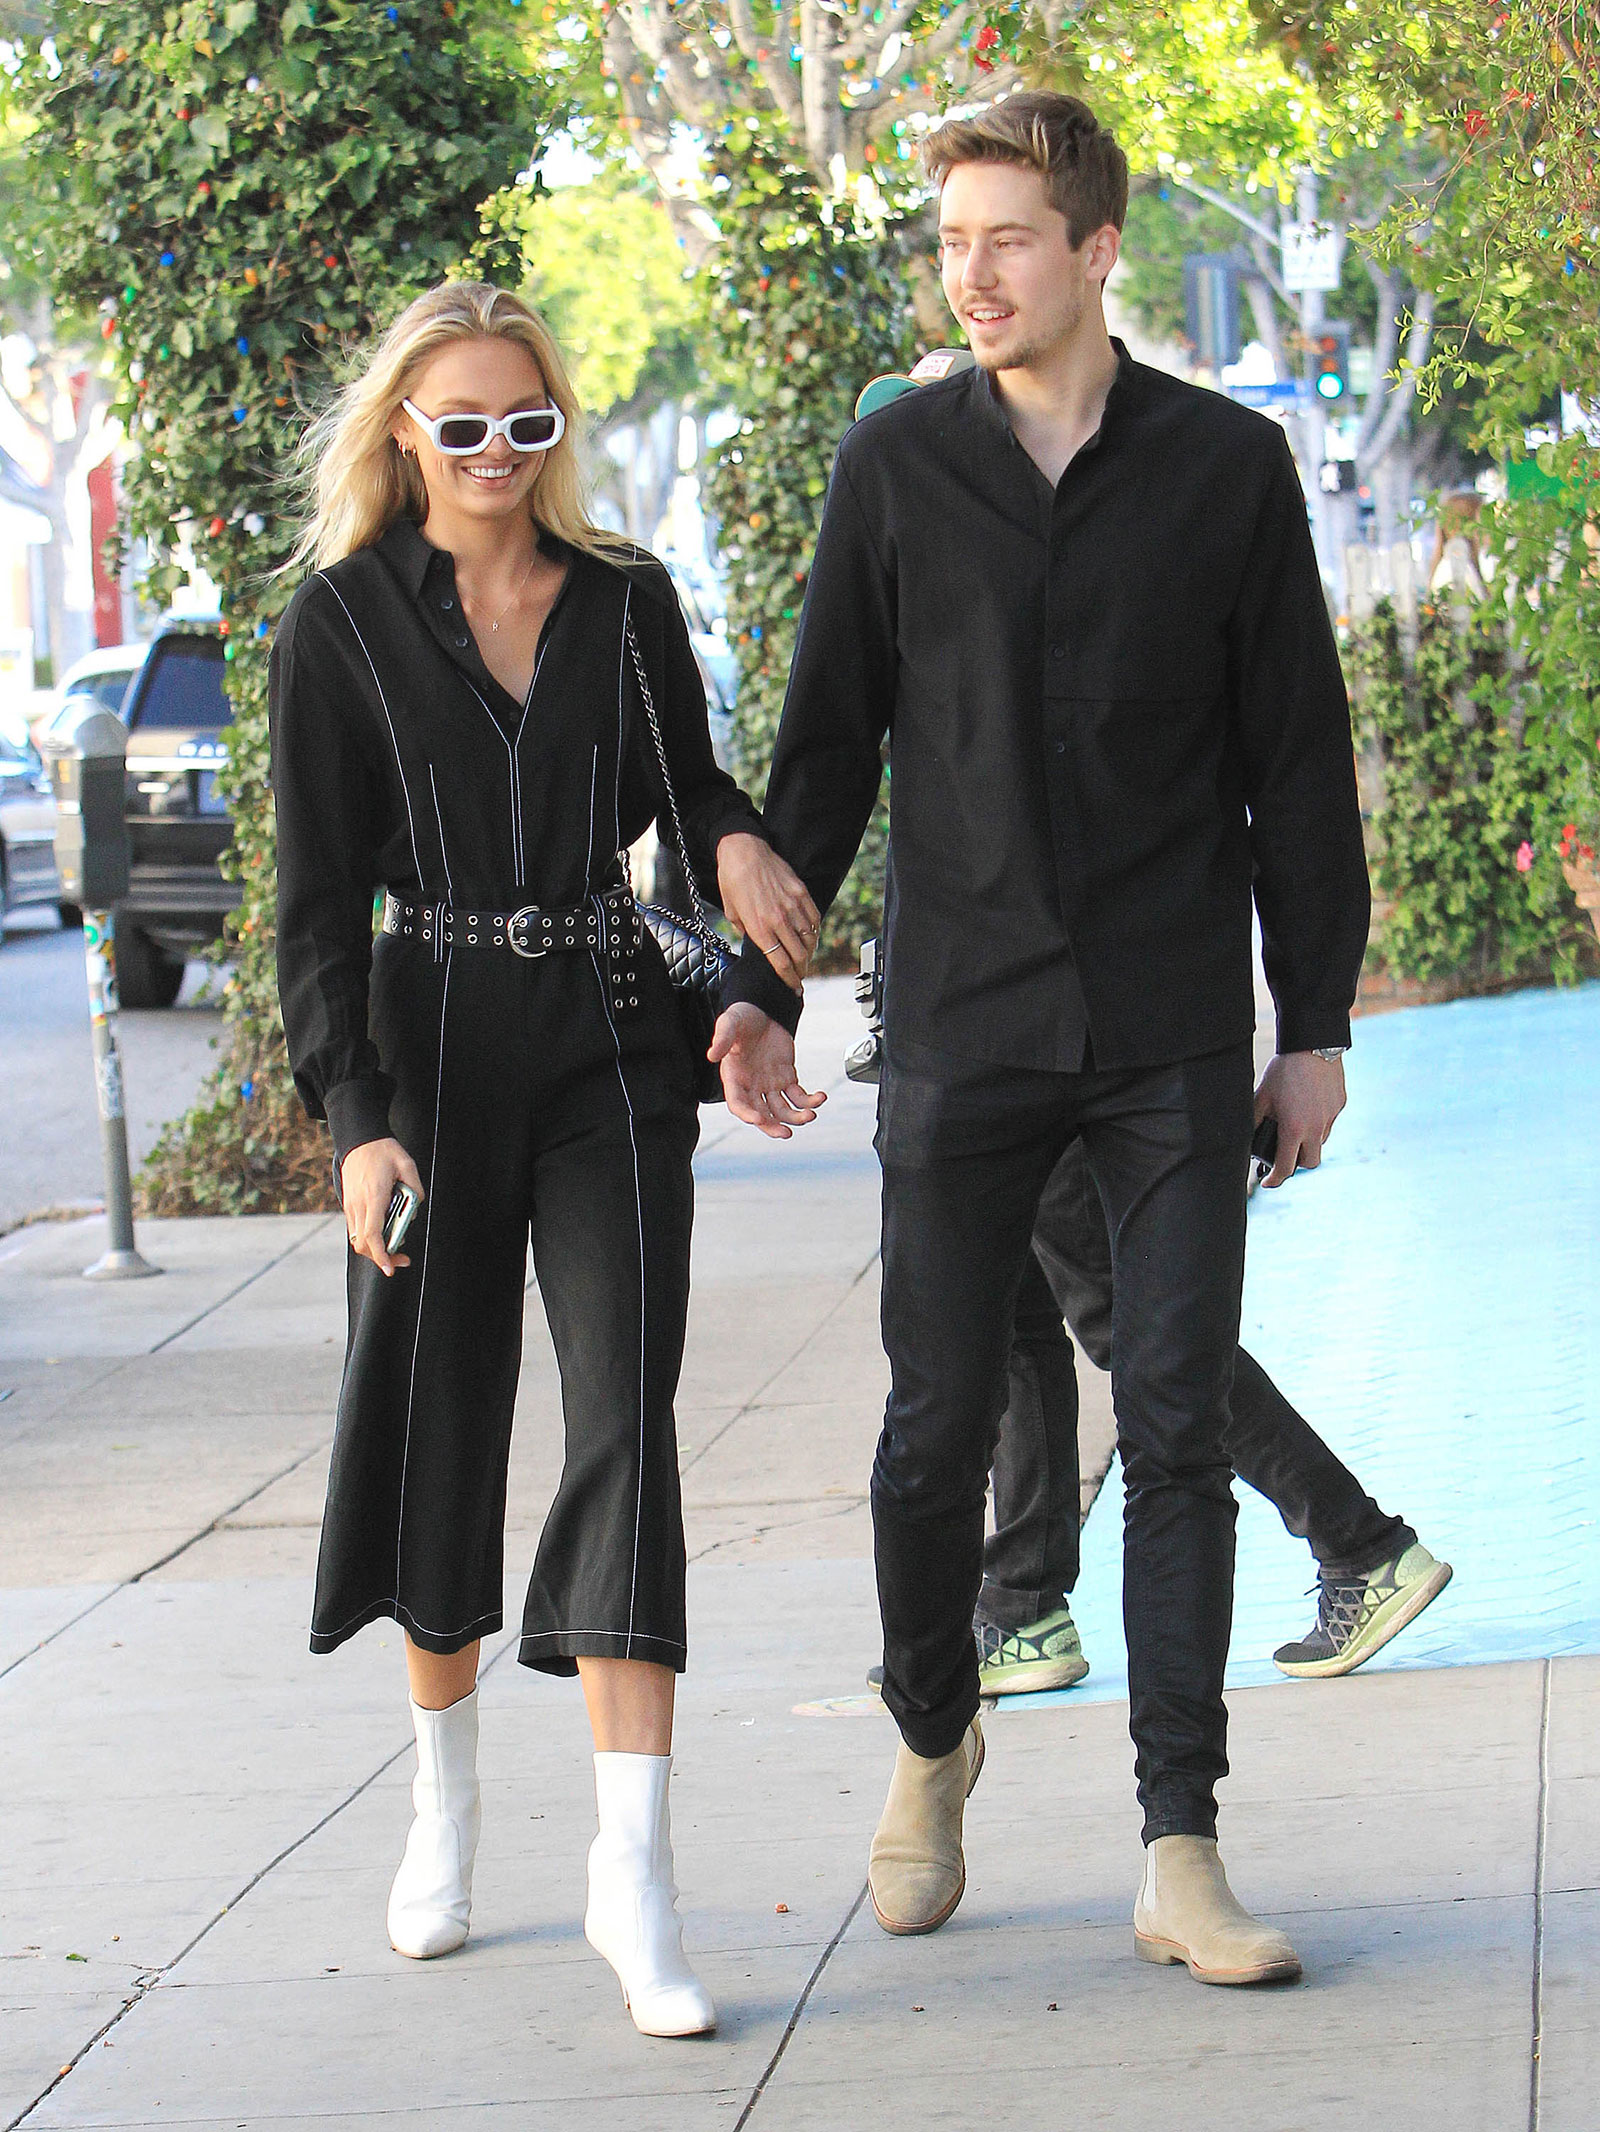 Romee Strijd's jumpsuit and white ankle boots look for less